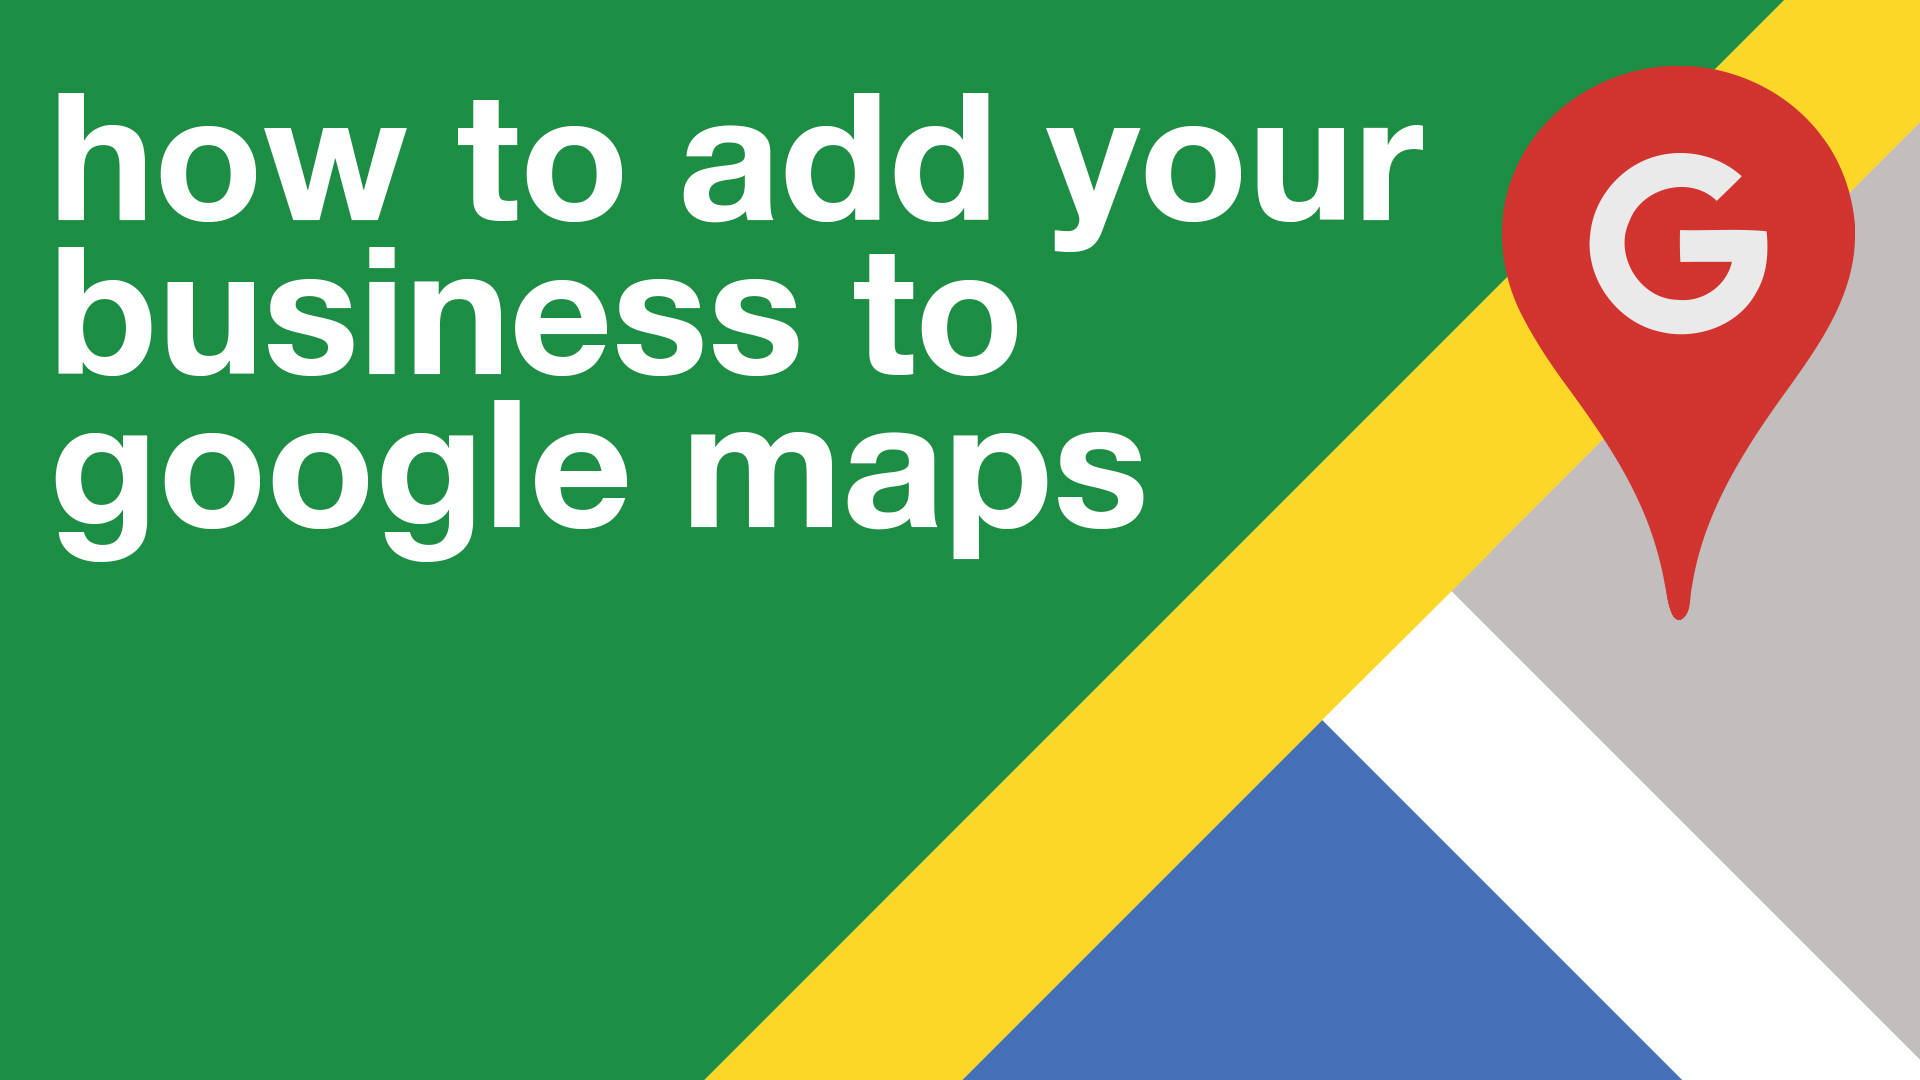 How To Add Your Business To Google MapsArtboard 1 